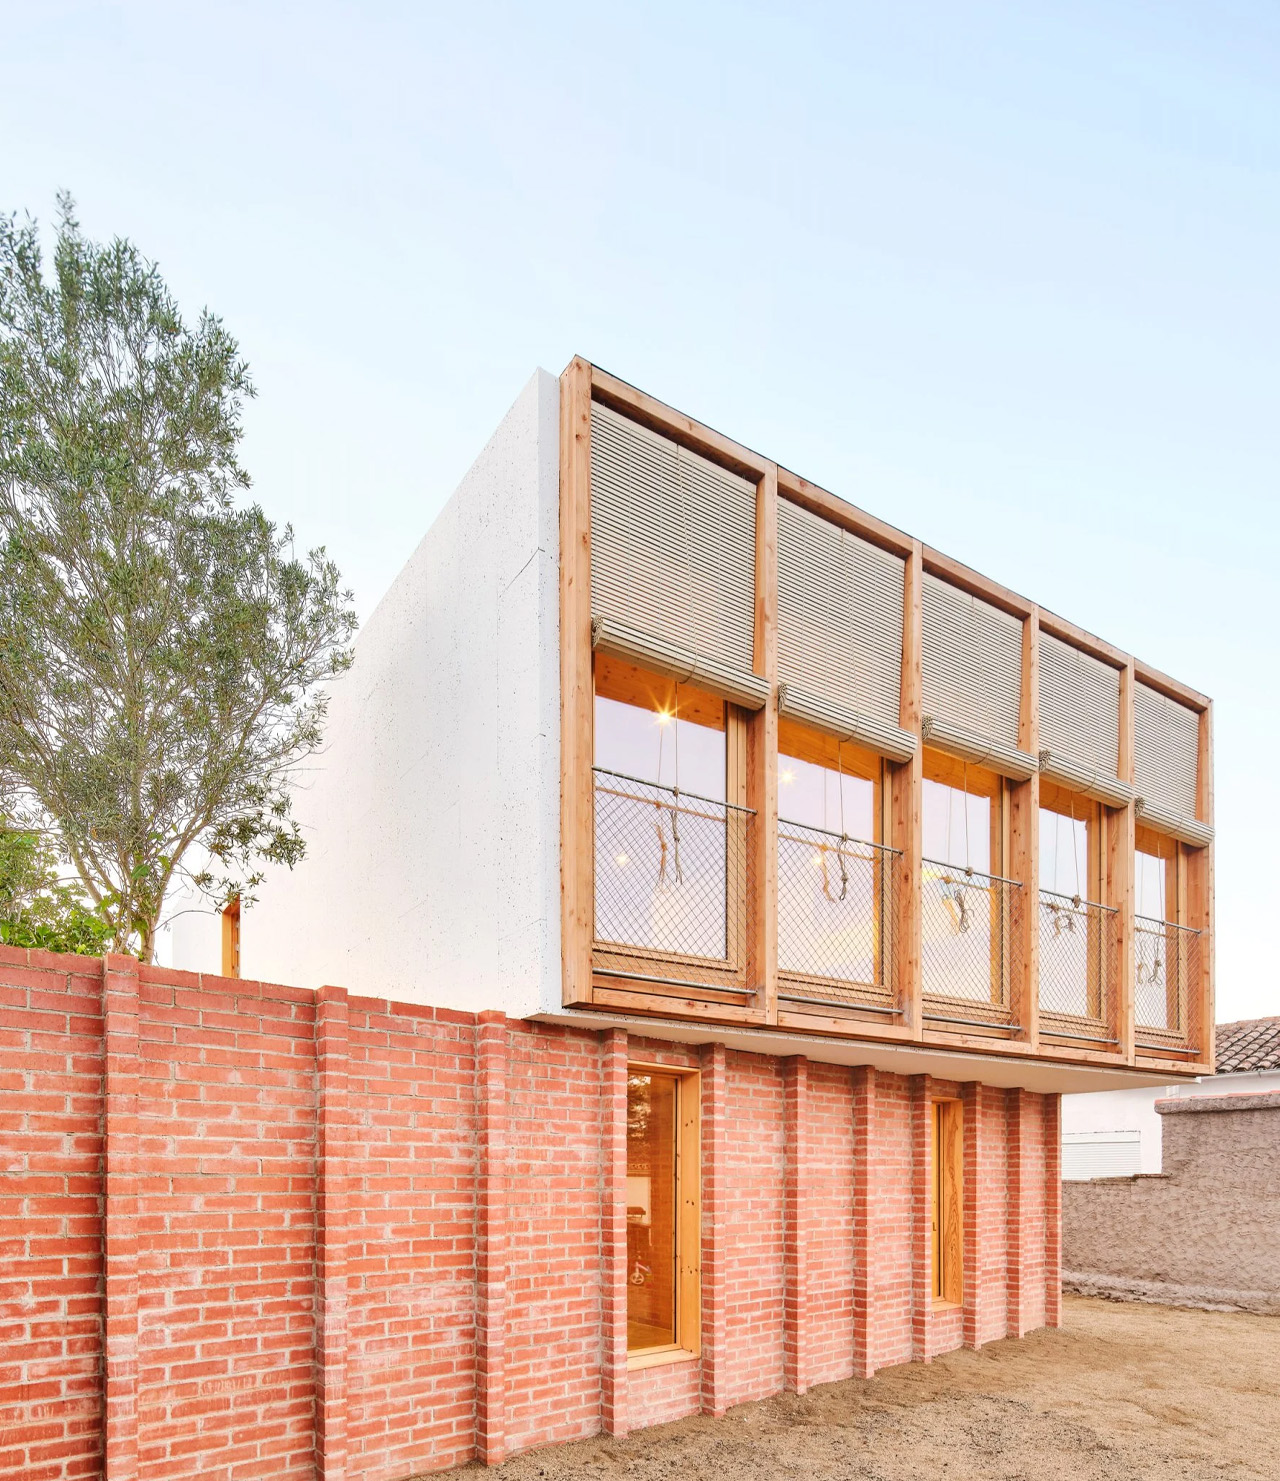 This prefabricated timber home in Barcelona has a bright red-brick building for a base